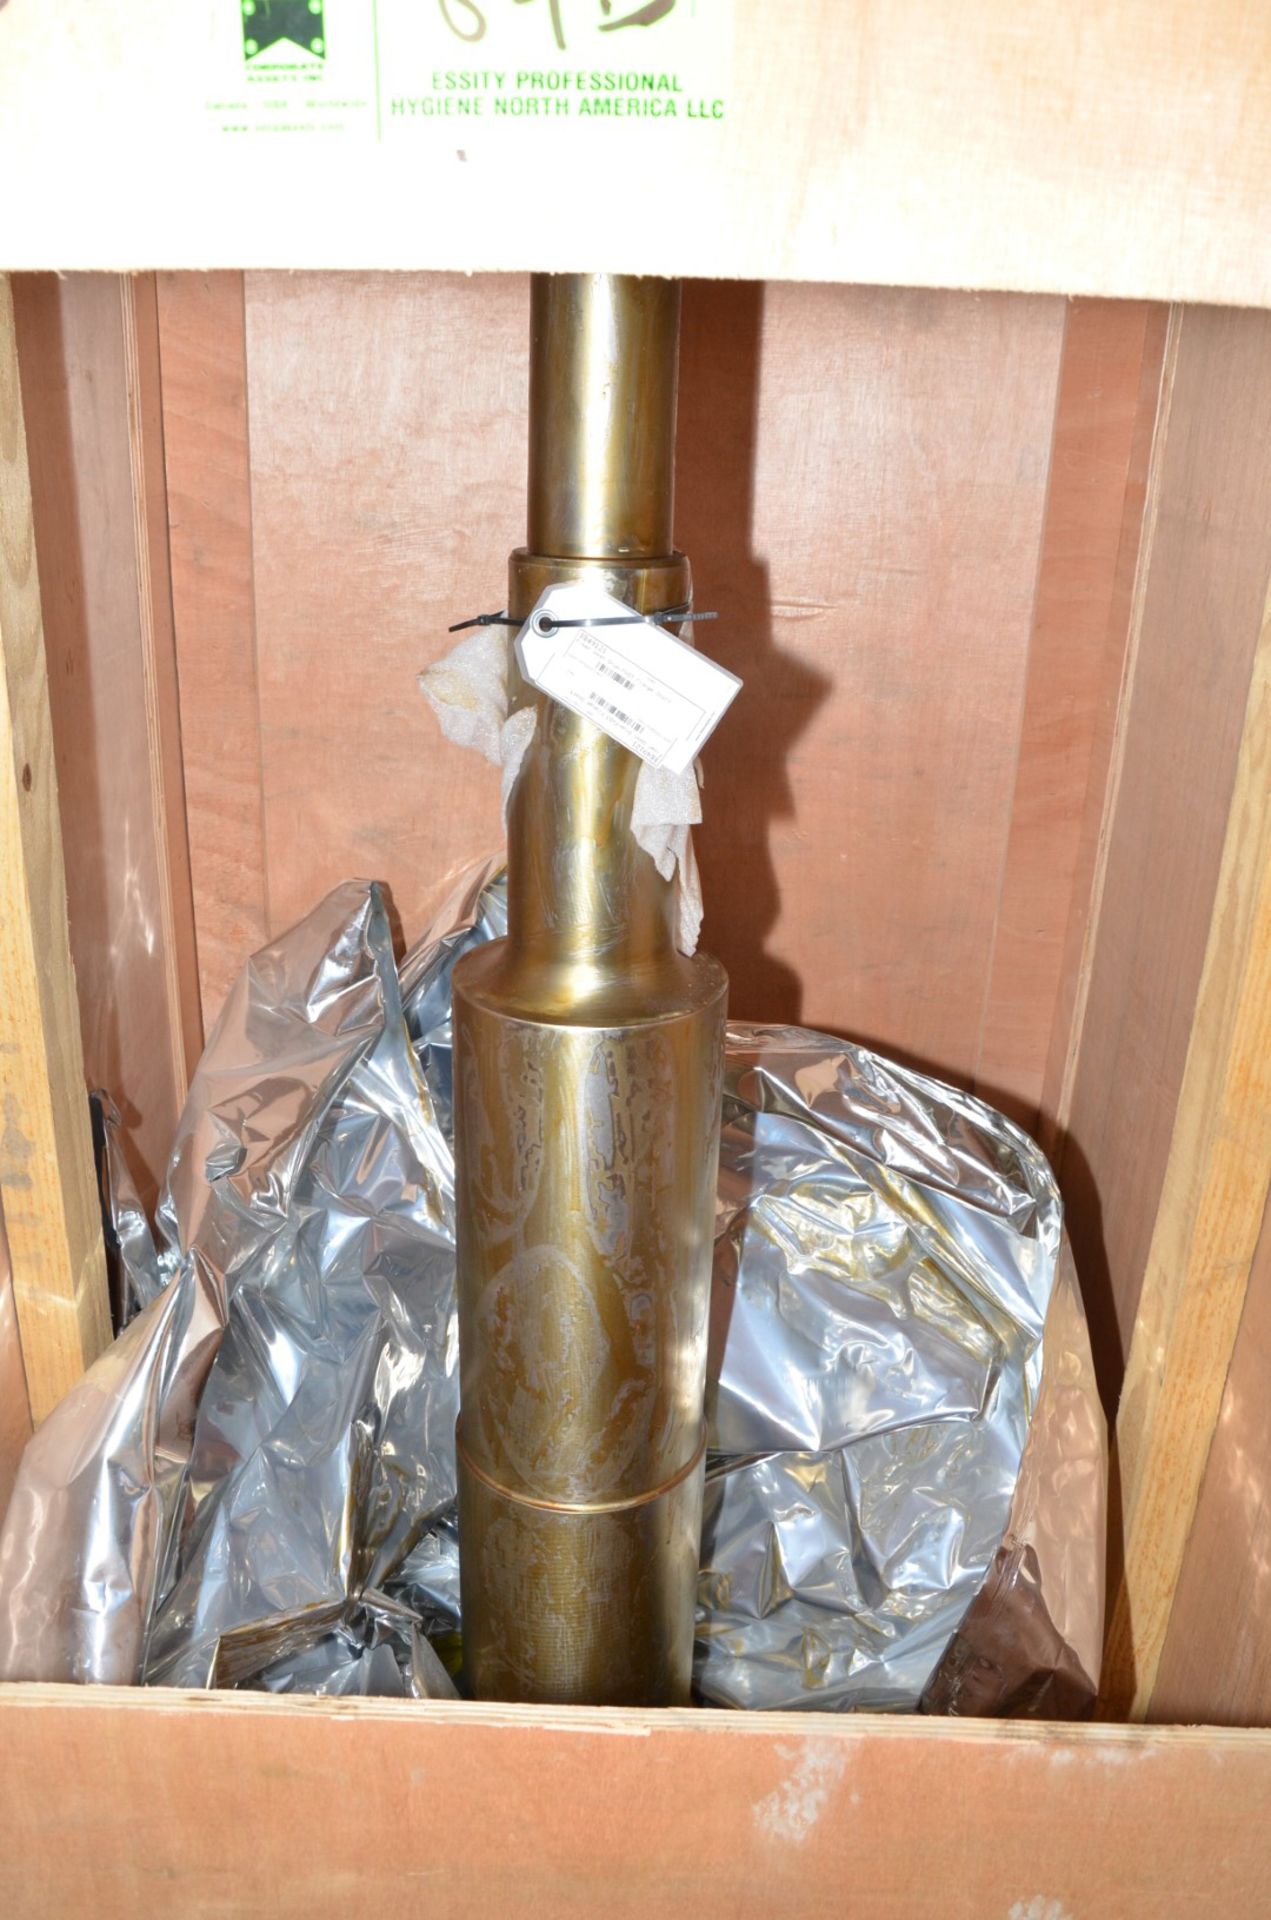 ANDRITZ MODUSCREEN T2D SPARE SHAFT [RIGGING FEE FOR LOT #84B - $25 USD PLUS APPLICABLE TAXES] - Image 3 of 4